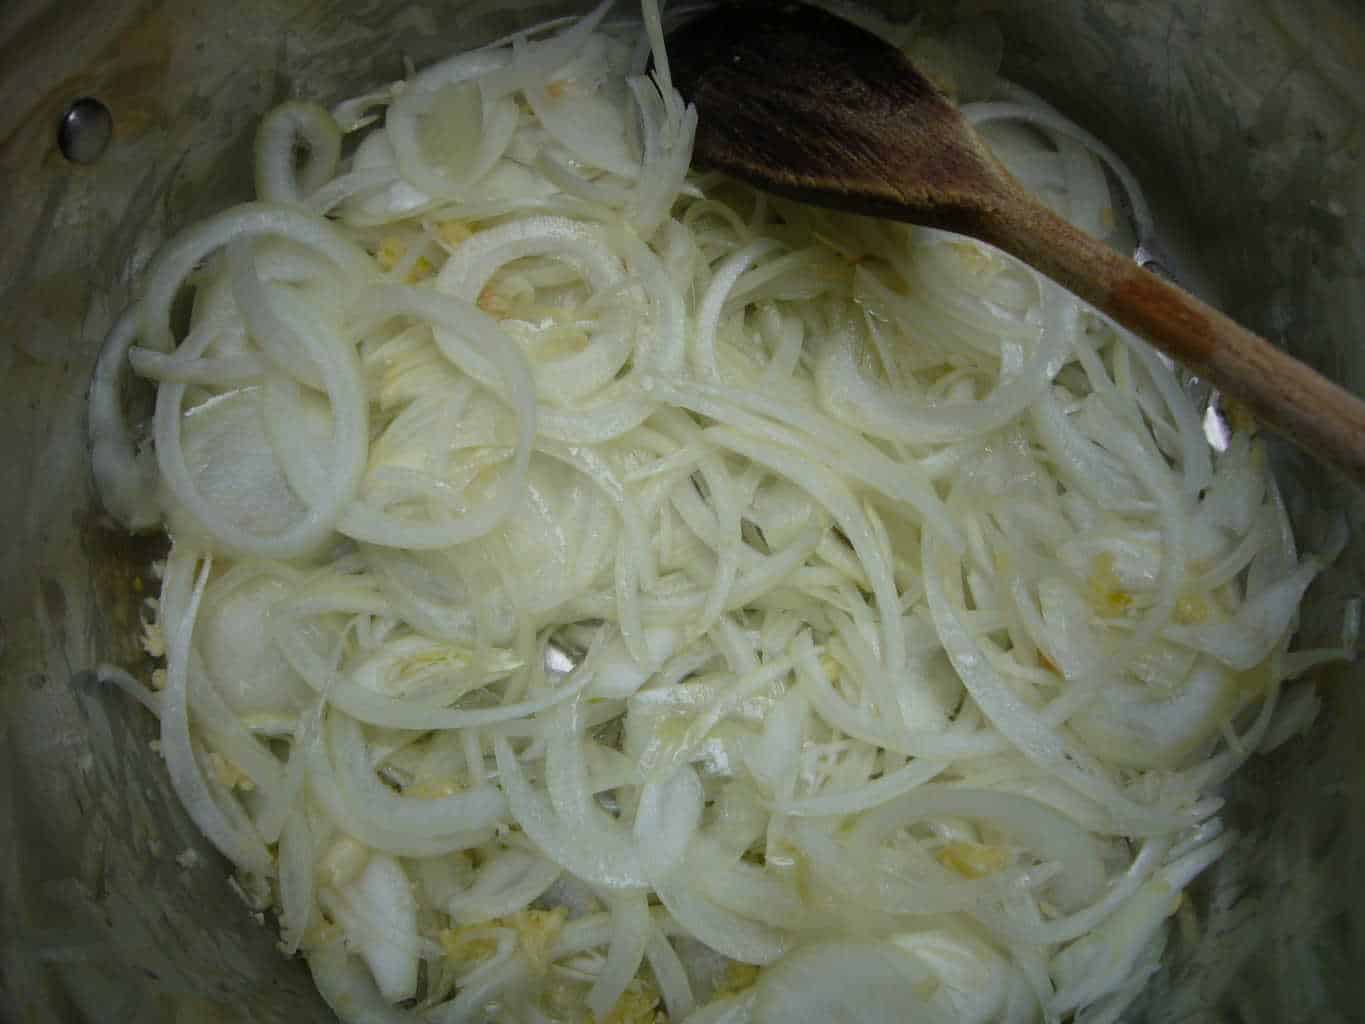 Onions thinly sliced for making soup.